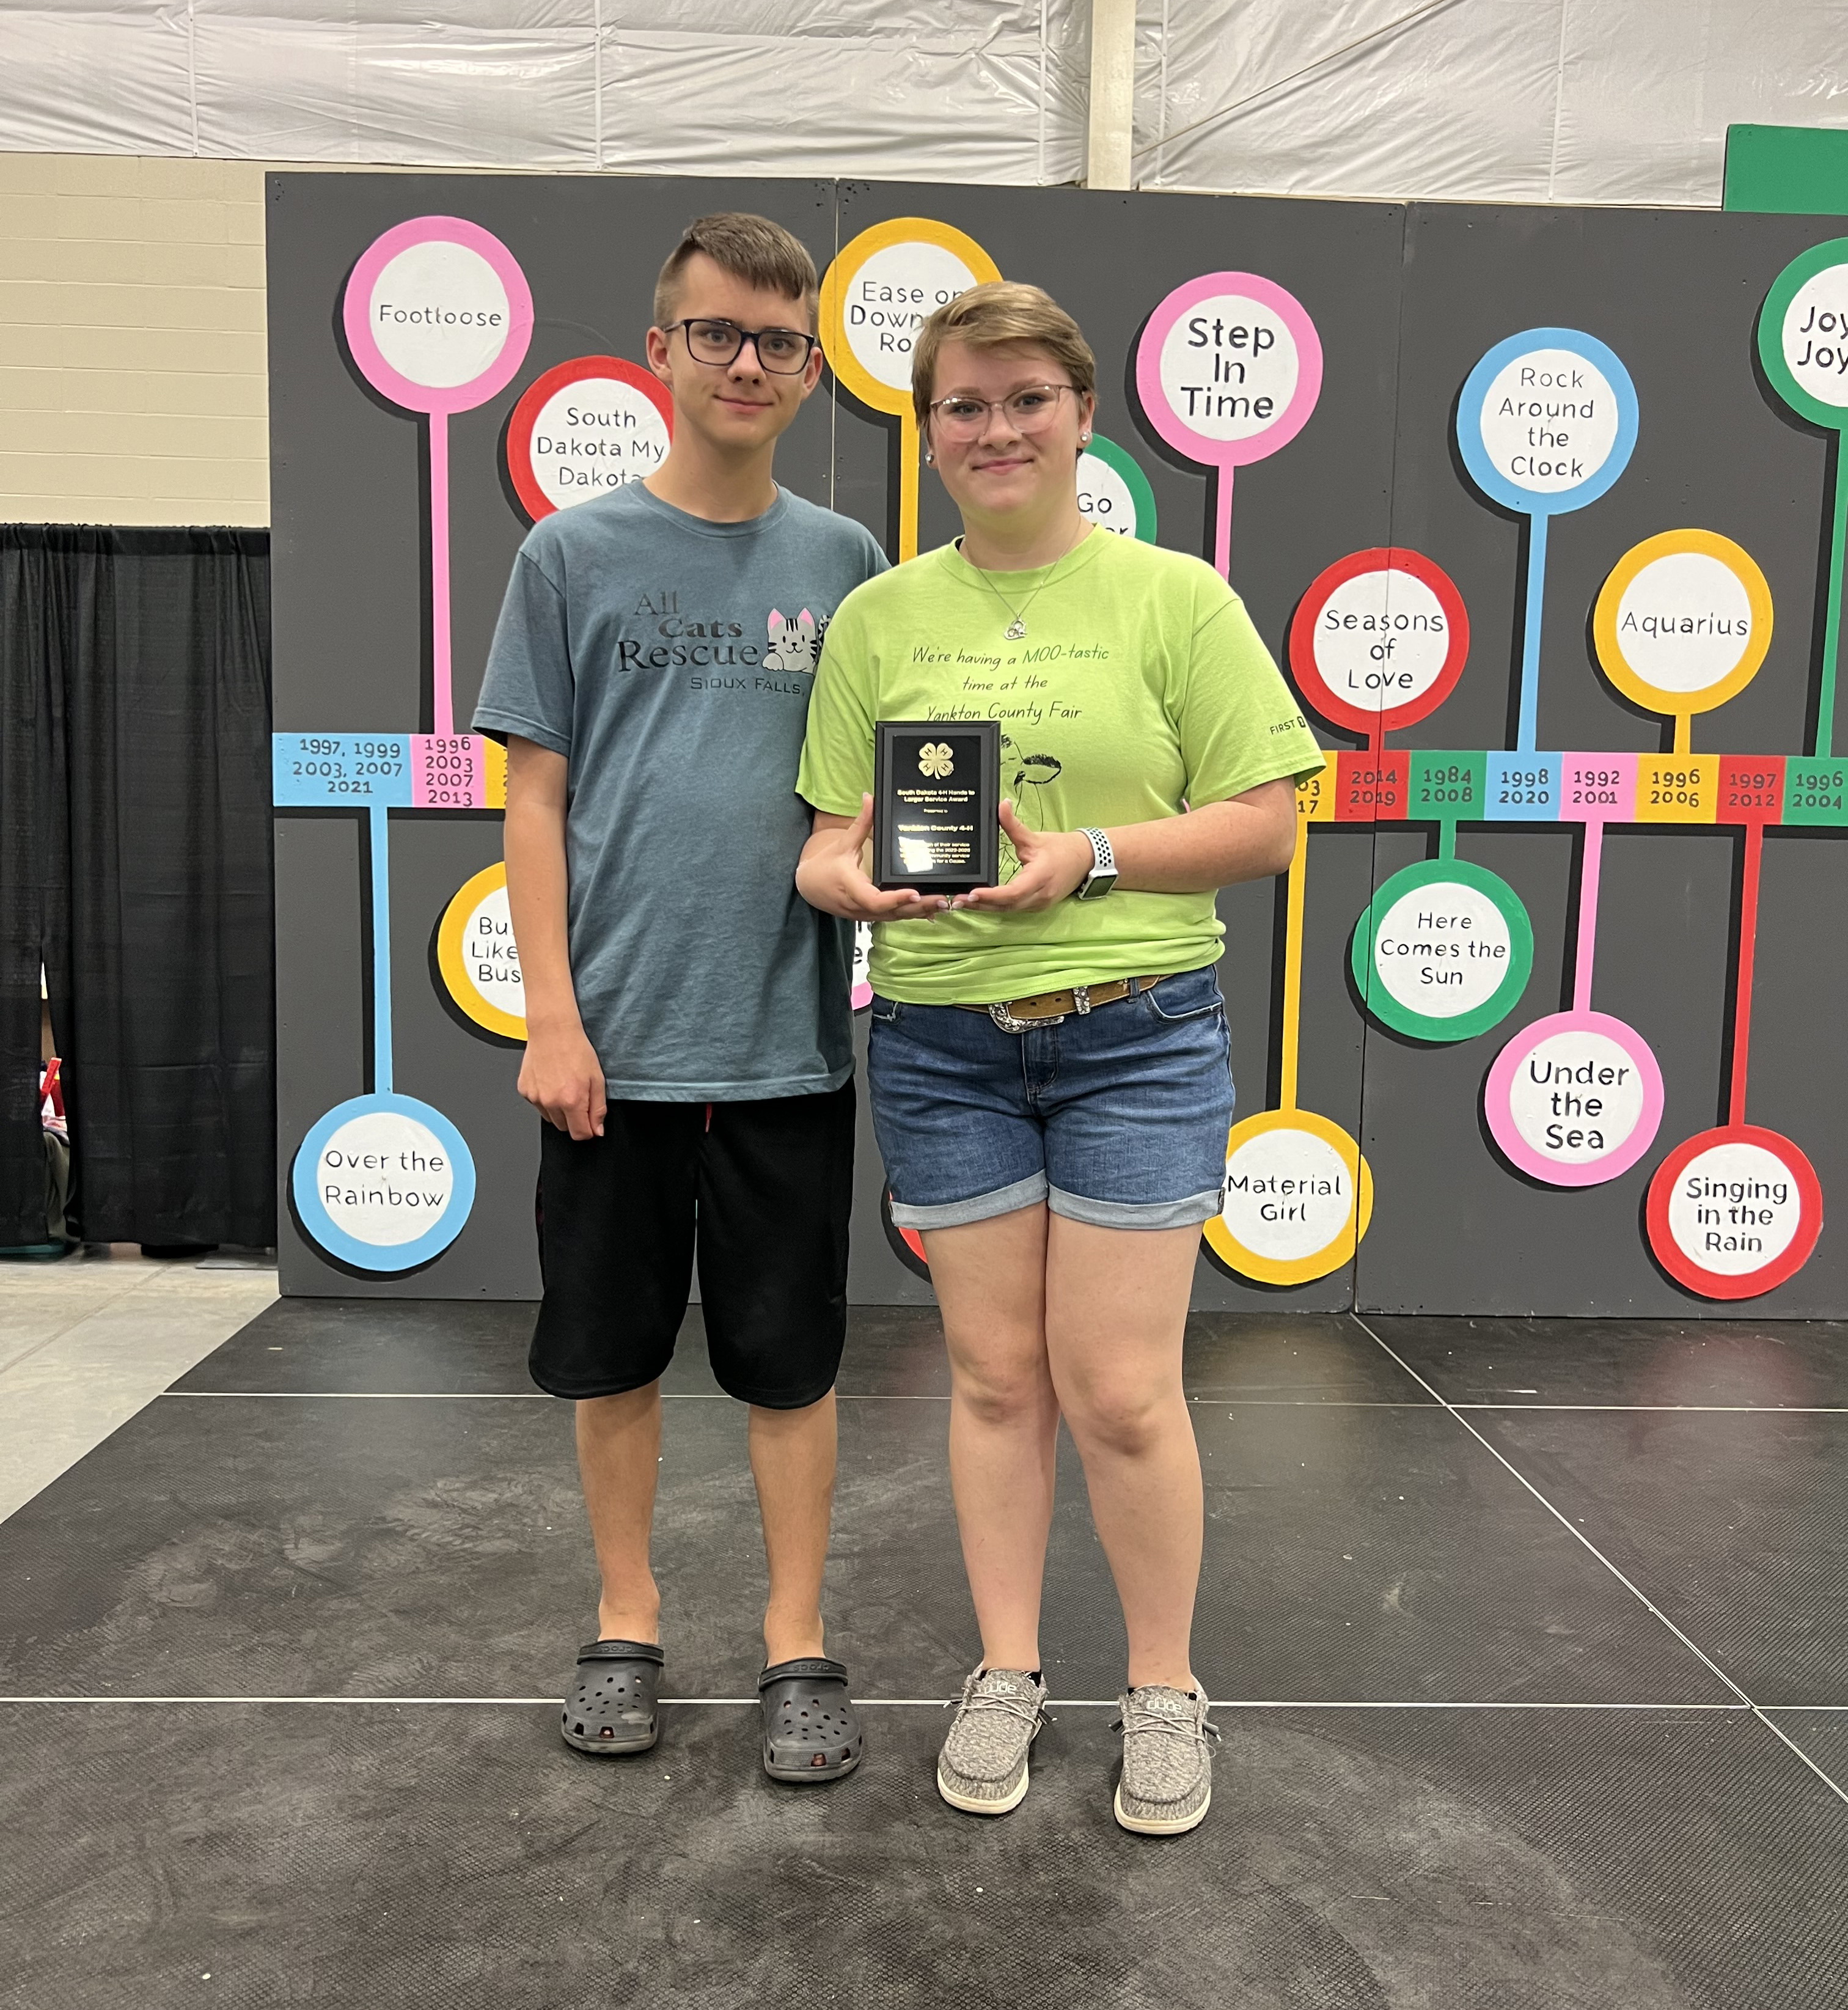 a teenage boy with short hair and glasses wearing a grey t-shirt and shorts stands next to a teenage girl with short hair and glasses wearing a bright green t-shirt and jean shorts holding an award plaque